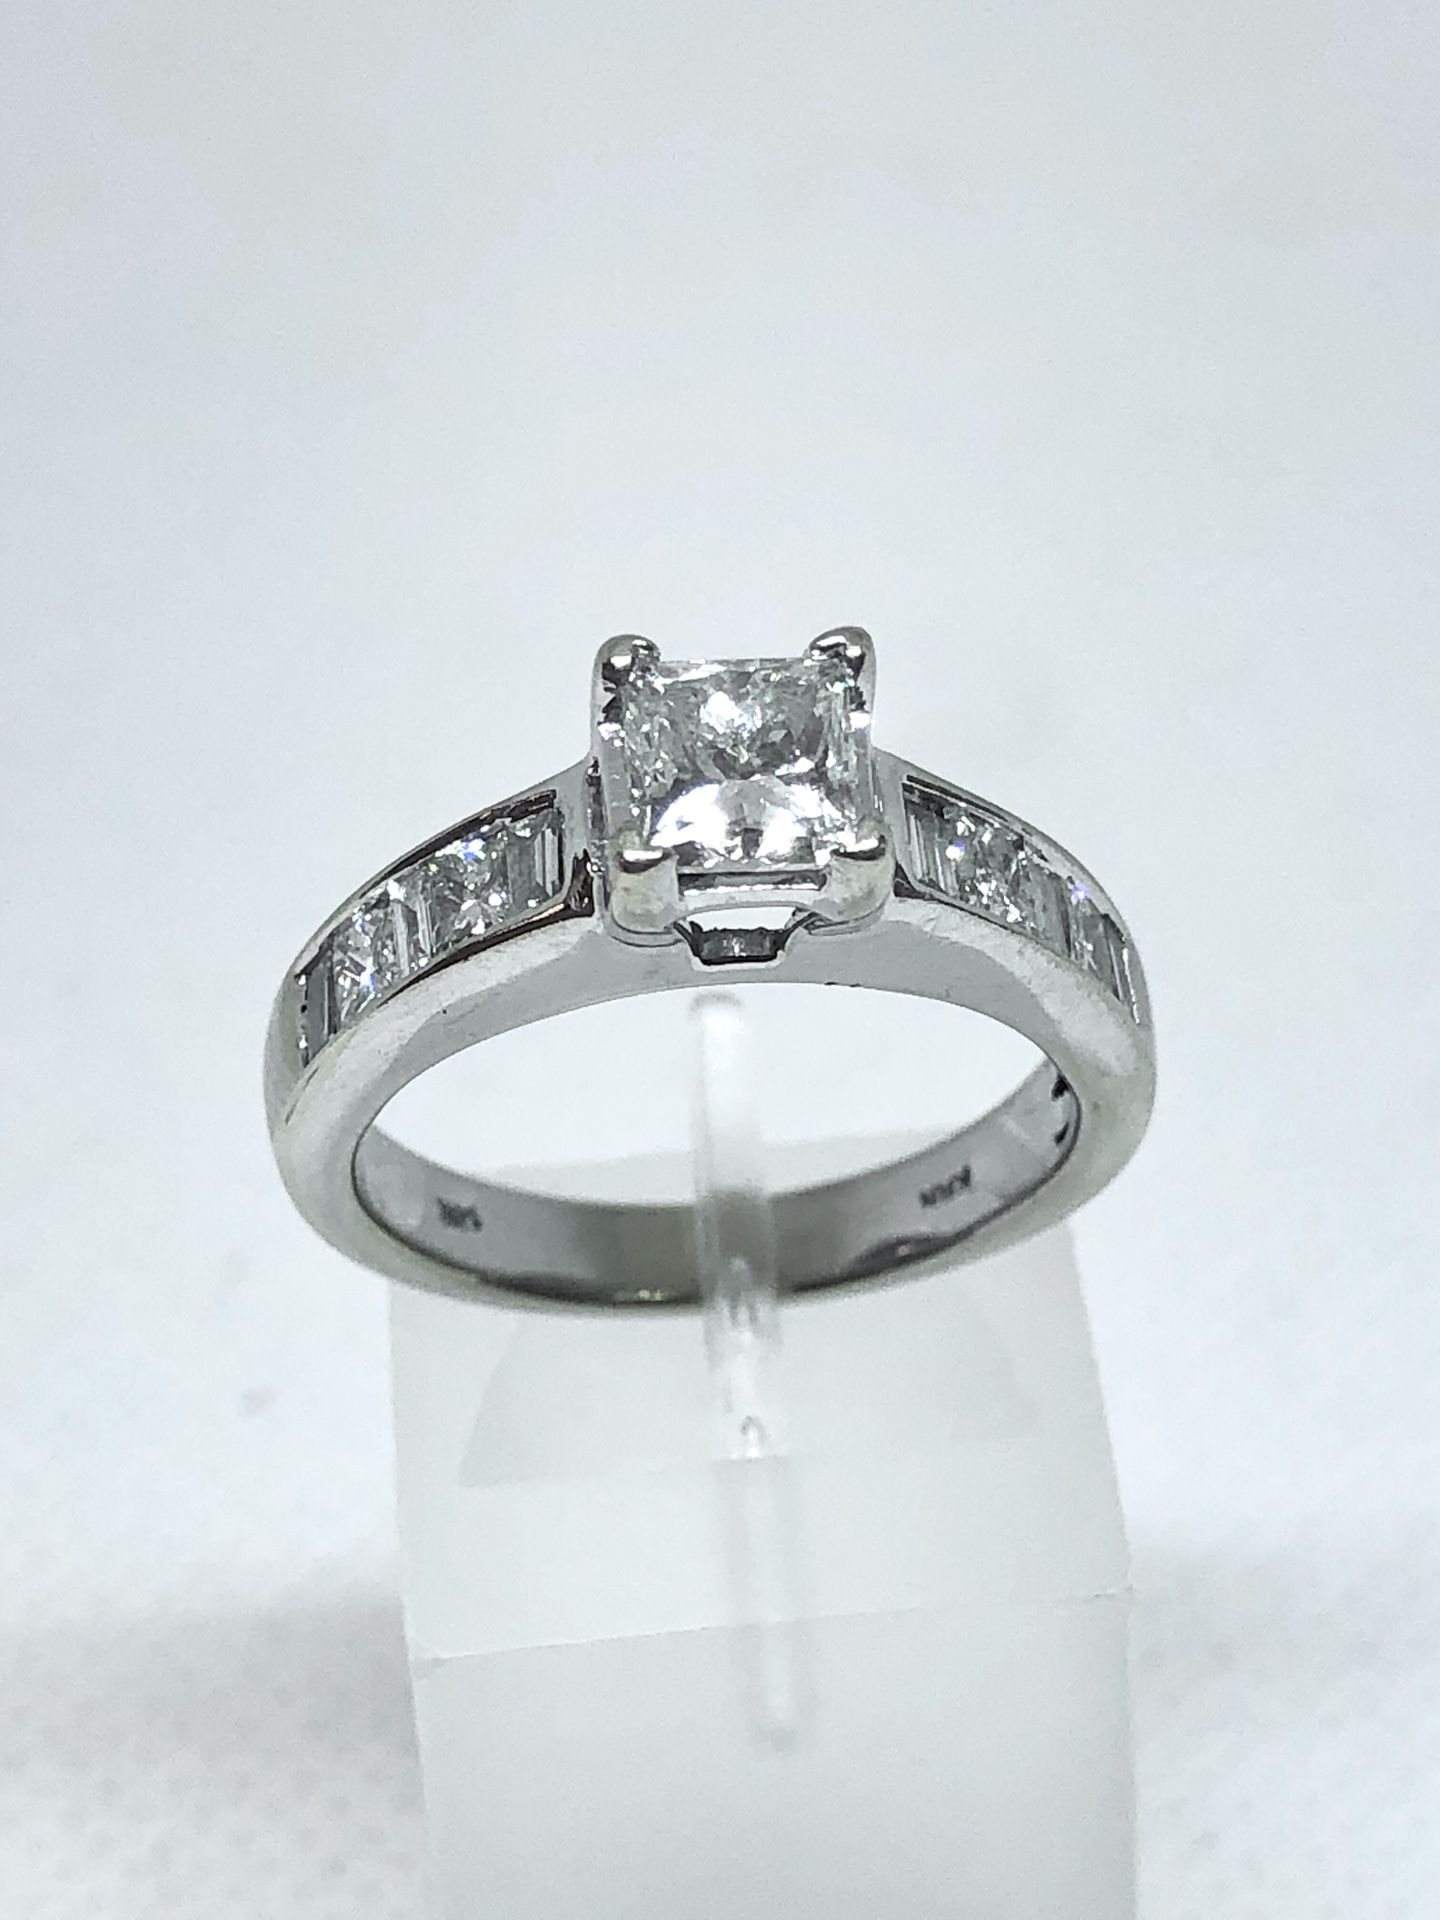 2.46 Carat Total Weight Wedding Band Set. .90 Princess Cut Center with G color and a VS2 Clarity